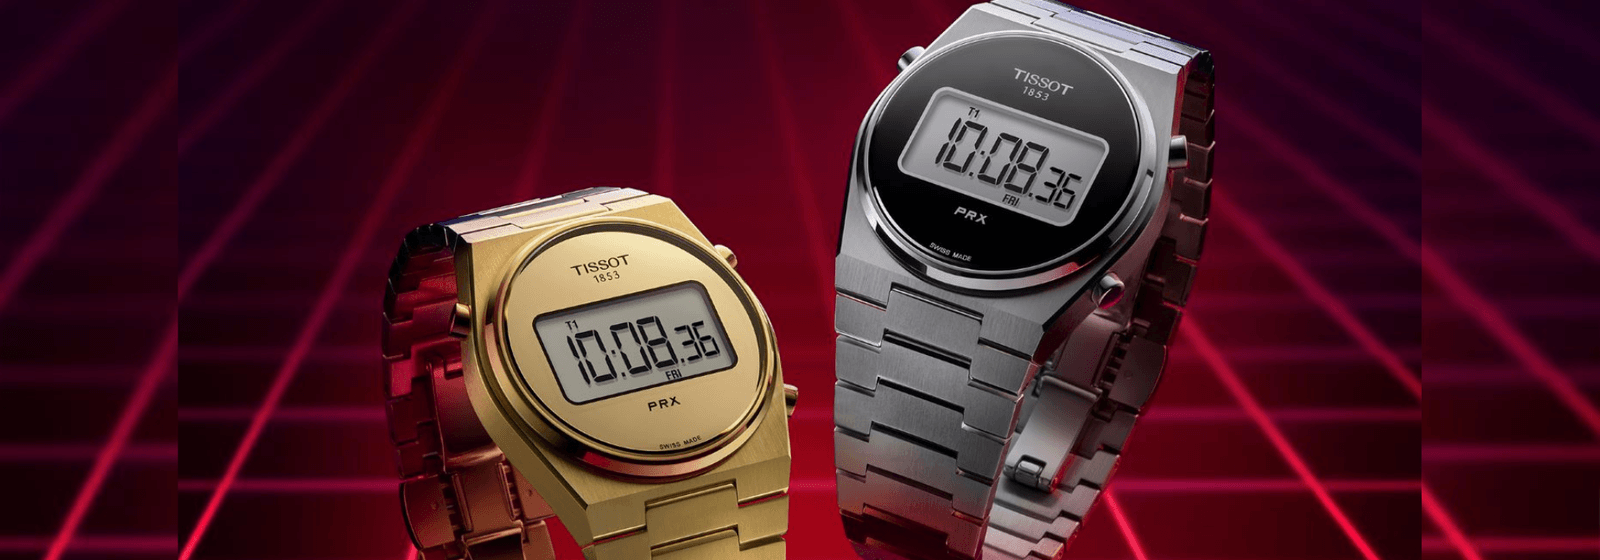 Tissot Launches the PRX Digital Watch